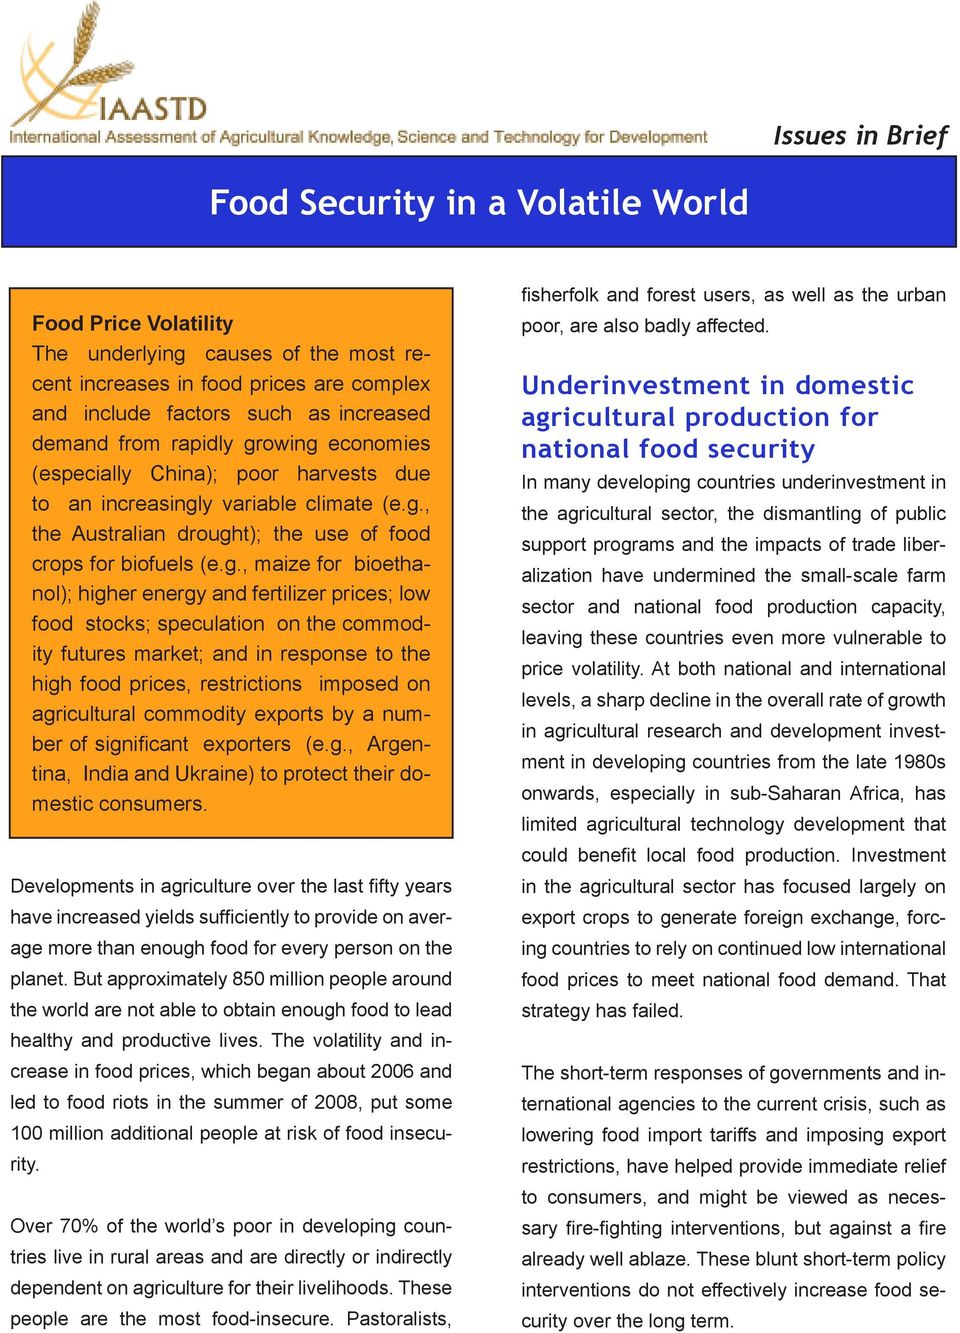 The volatility and increase in food prices, which began about 2006 and led to food riots in the summer of 2008, put some 100 million additional people at risk of food insecurity.